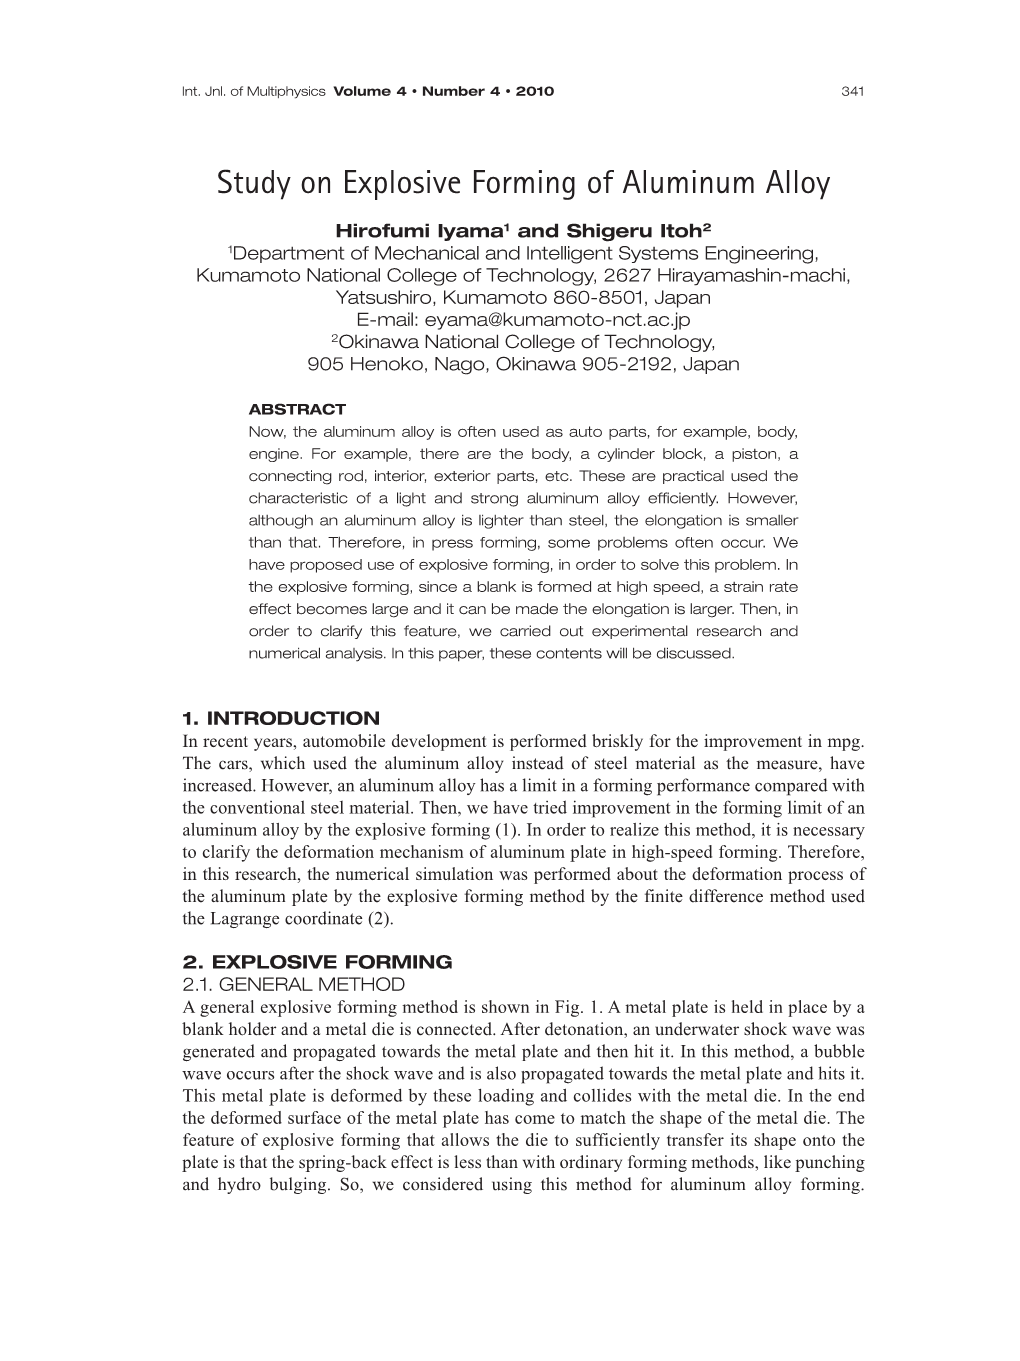 Study on Explosive Forming of Aluminum Alloy